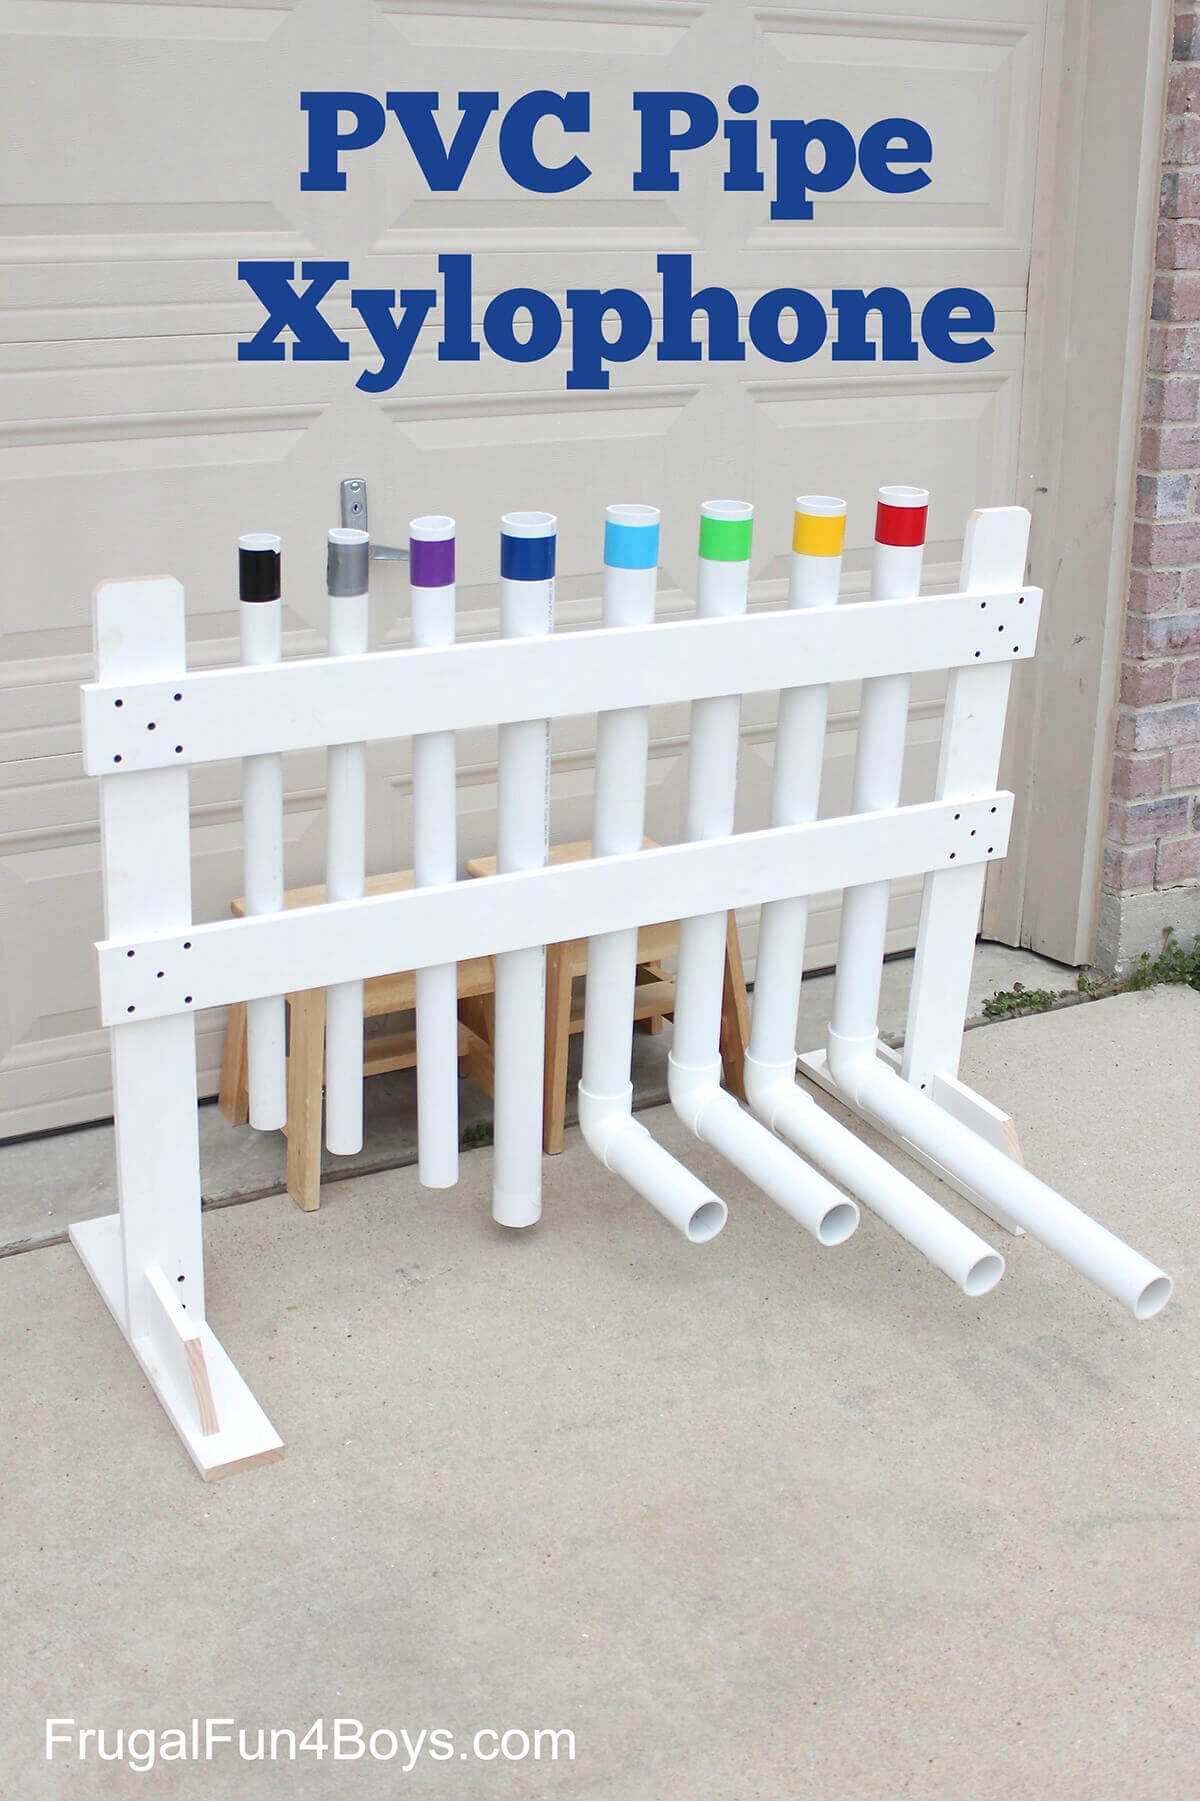 DIY Pipe Xylophone for Young Musicians